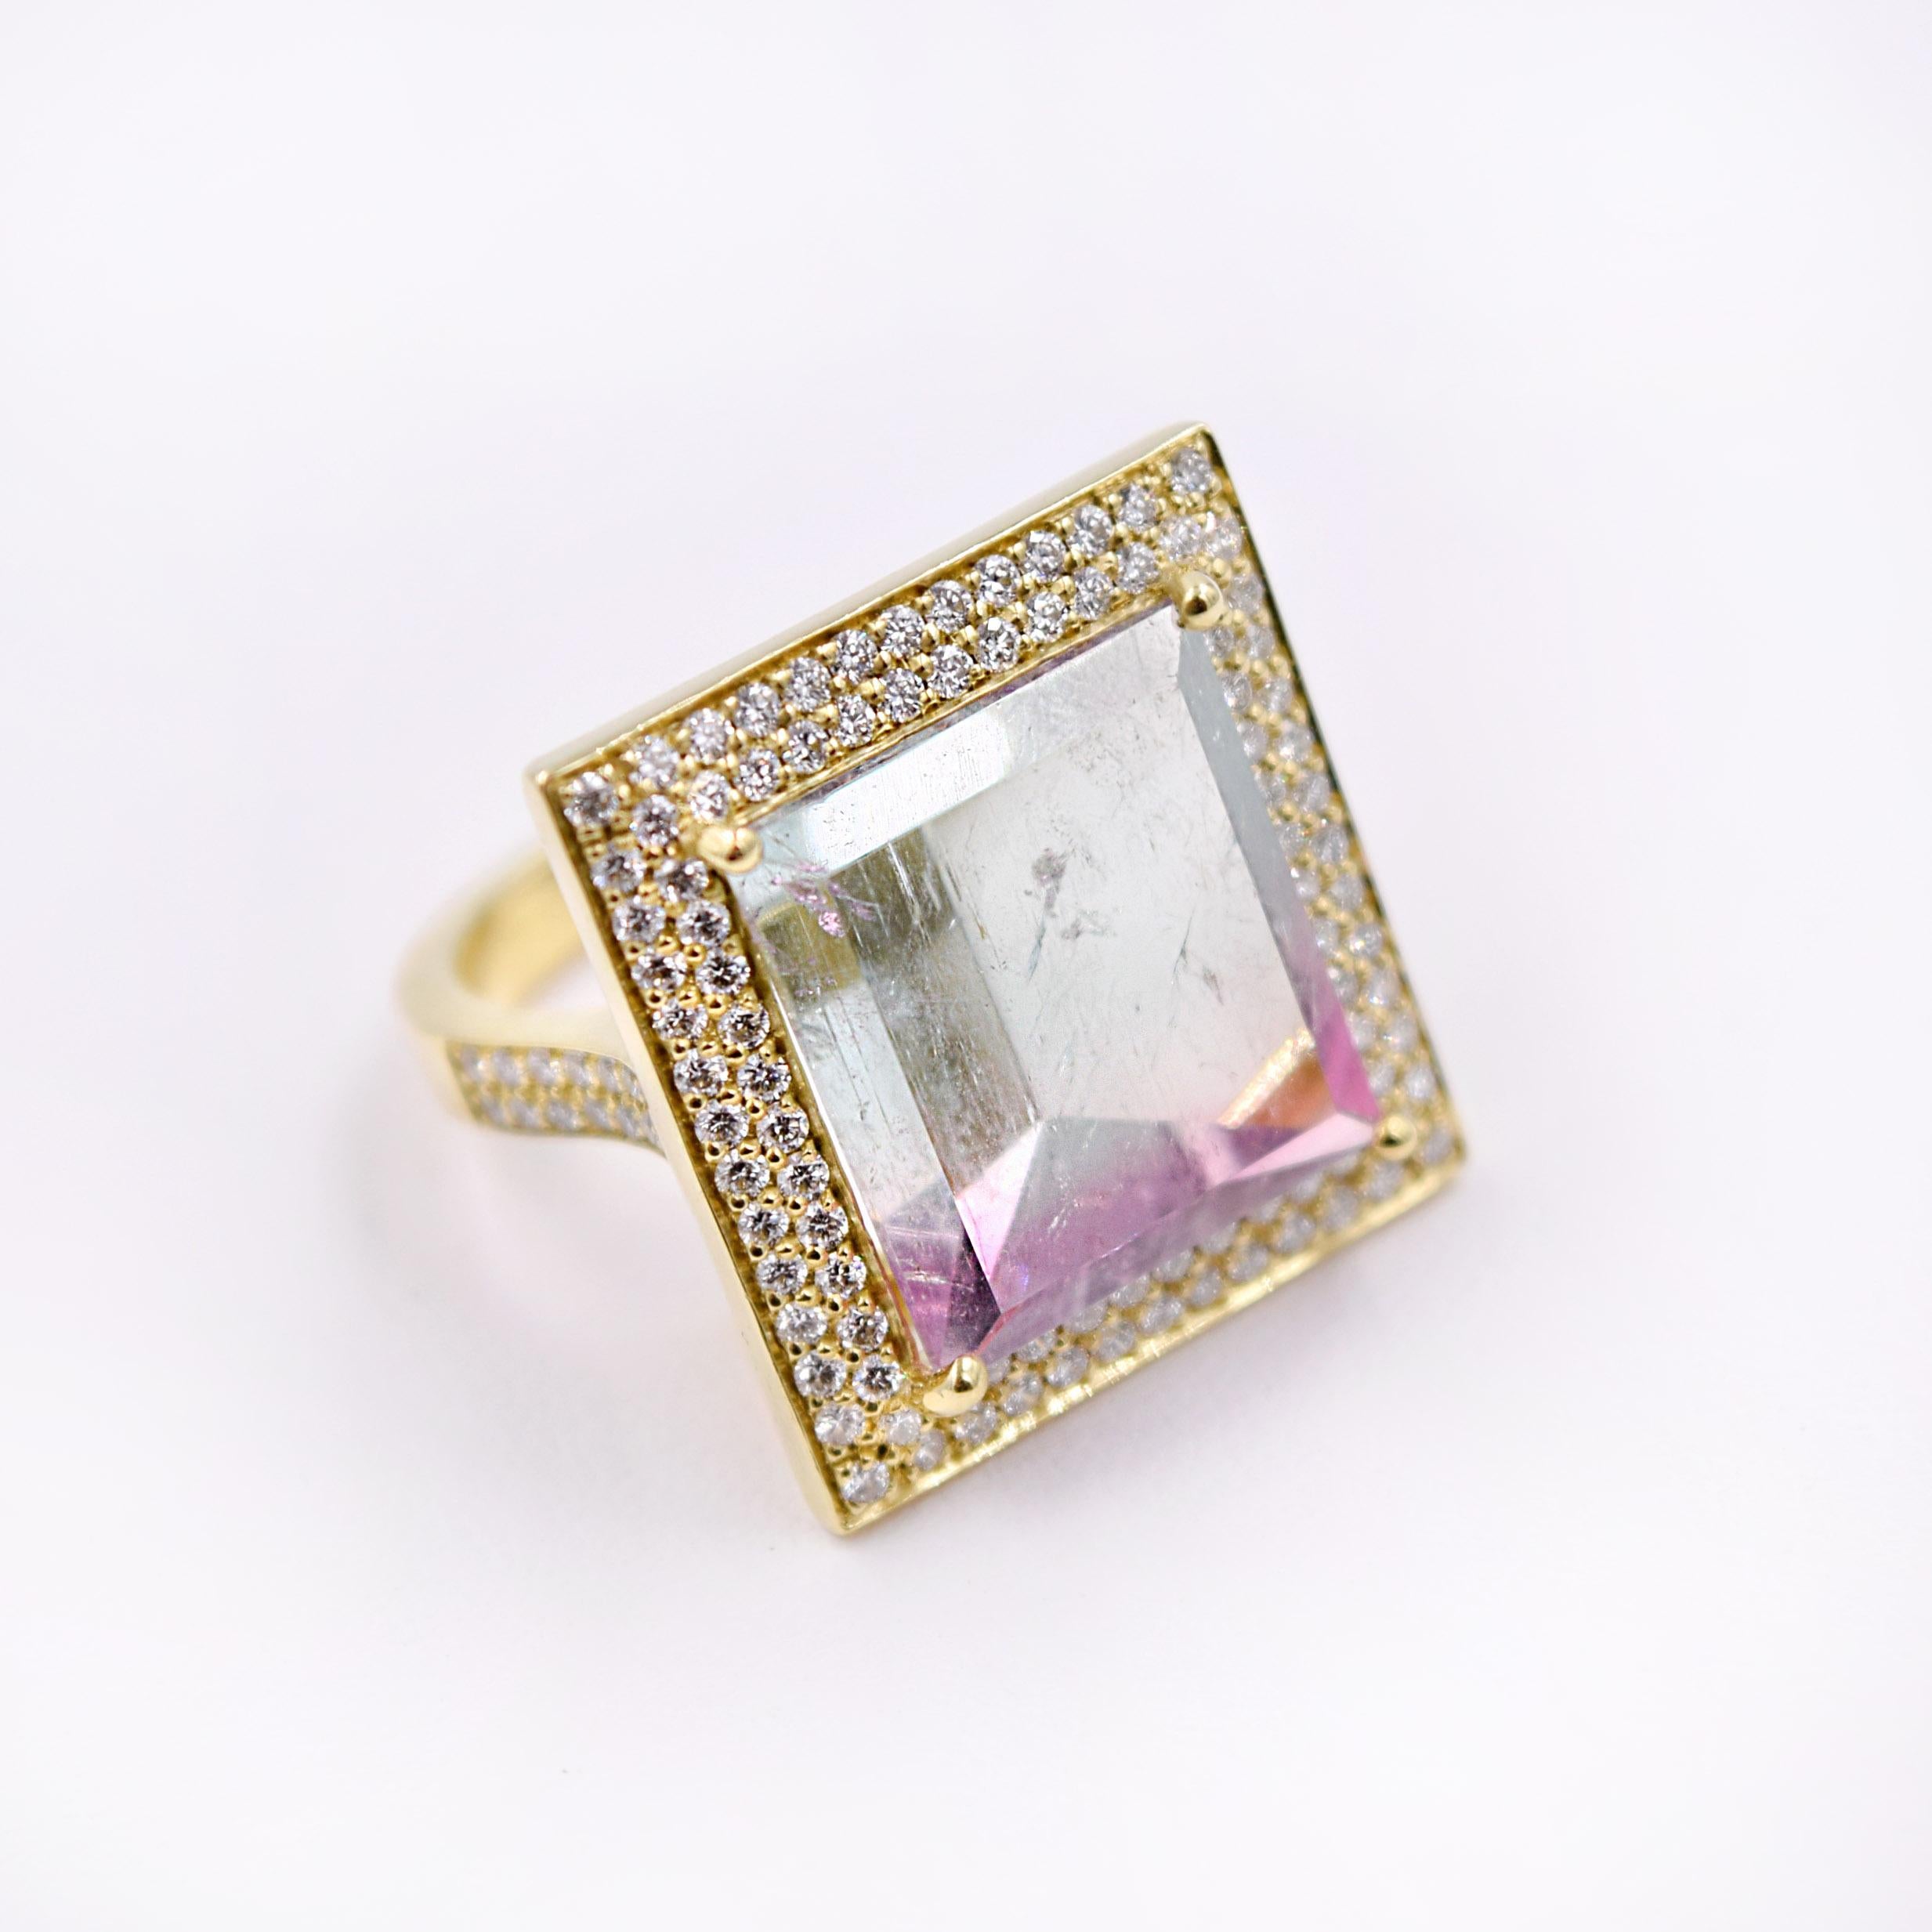 Stunning Mirror Cut 35.71 Carat Watermelon Tourmaline Cocktail Ring.
Two rows of Brilliant White Diamonds, 1.21 Carats,  pave set around the Tourmaline.
Flashy and Fun with its size and geometric design.
The ring is made in 18 Karat Yellow Gold and